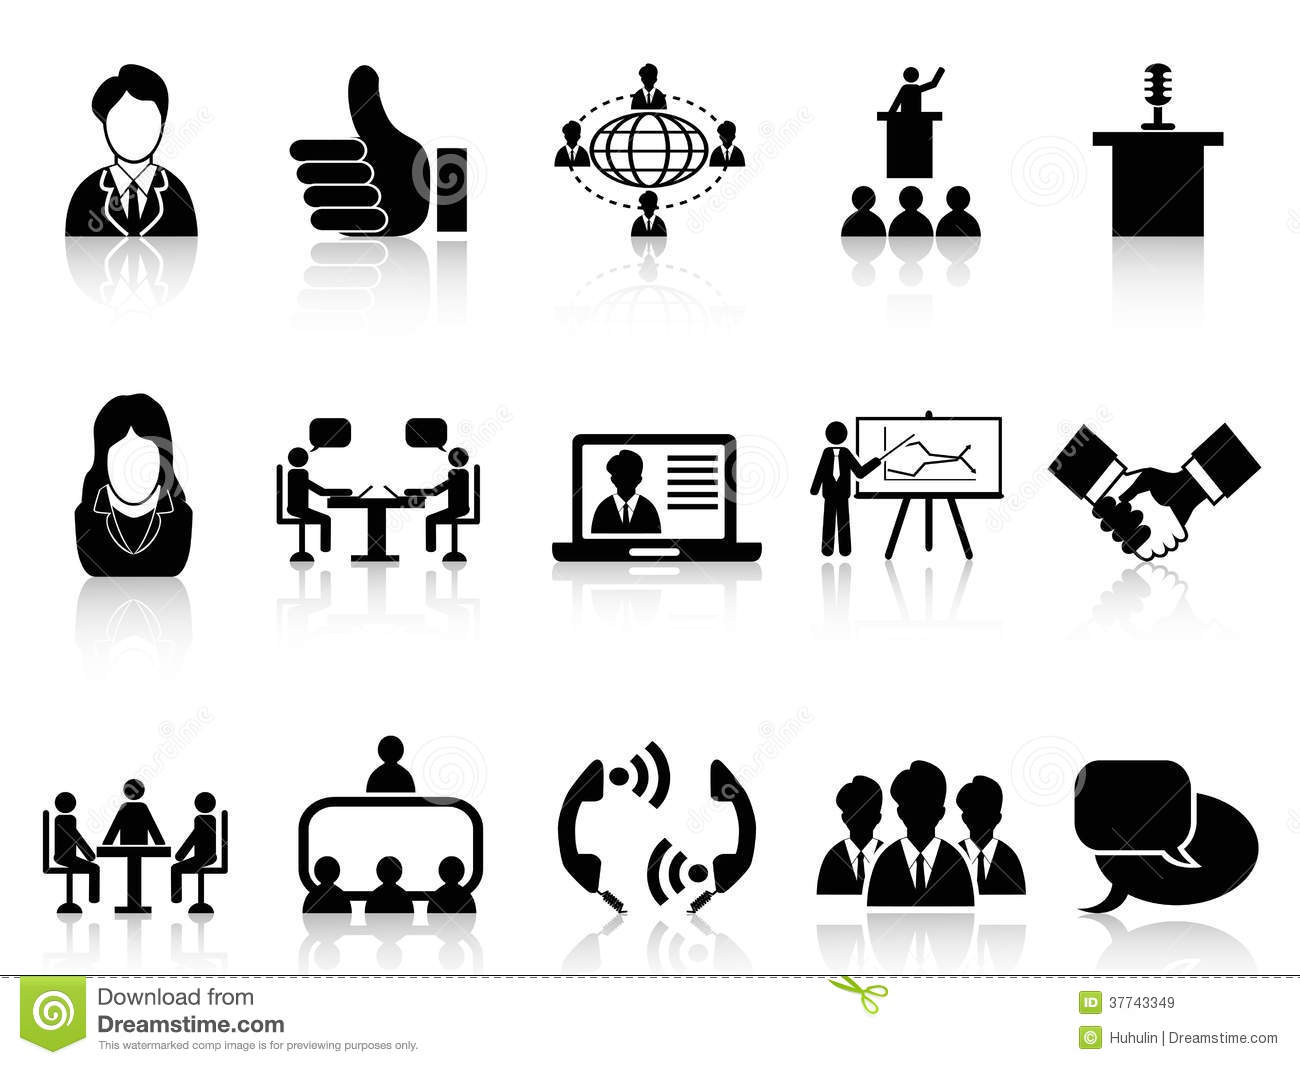 Business Meeting Icons Set Royalty Free Stock Images   Image  37743349